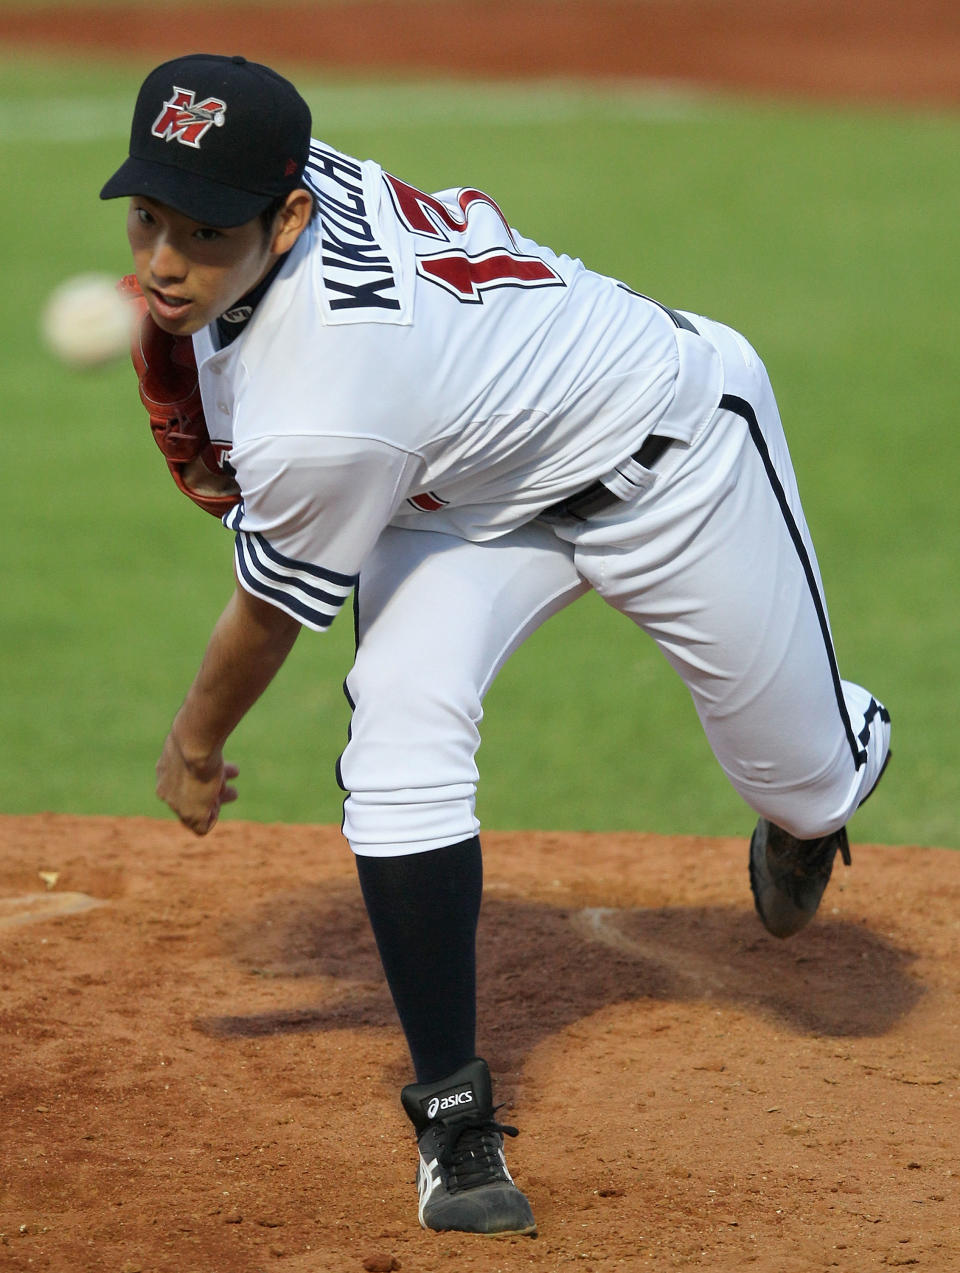 MELBOURNE, AUSTRALIA – NOVEMBER 17: Yusei Kikuchi pitcher for the Aces in action during the Australian Baseball League match between the Melbourne Aces and the Brisbane Bandits at Melbourne Showgrounds on November 17, 2011 in Melbourne, Australia. (Photo by Hamish Blair/Getty Images)